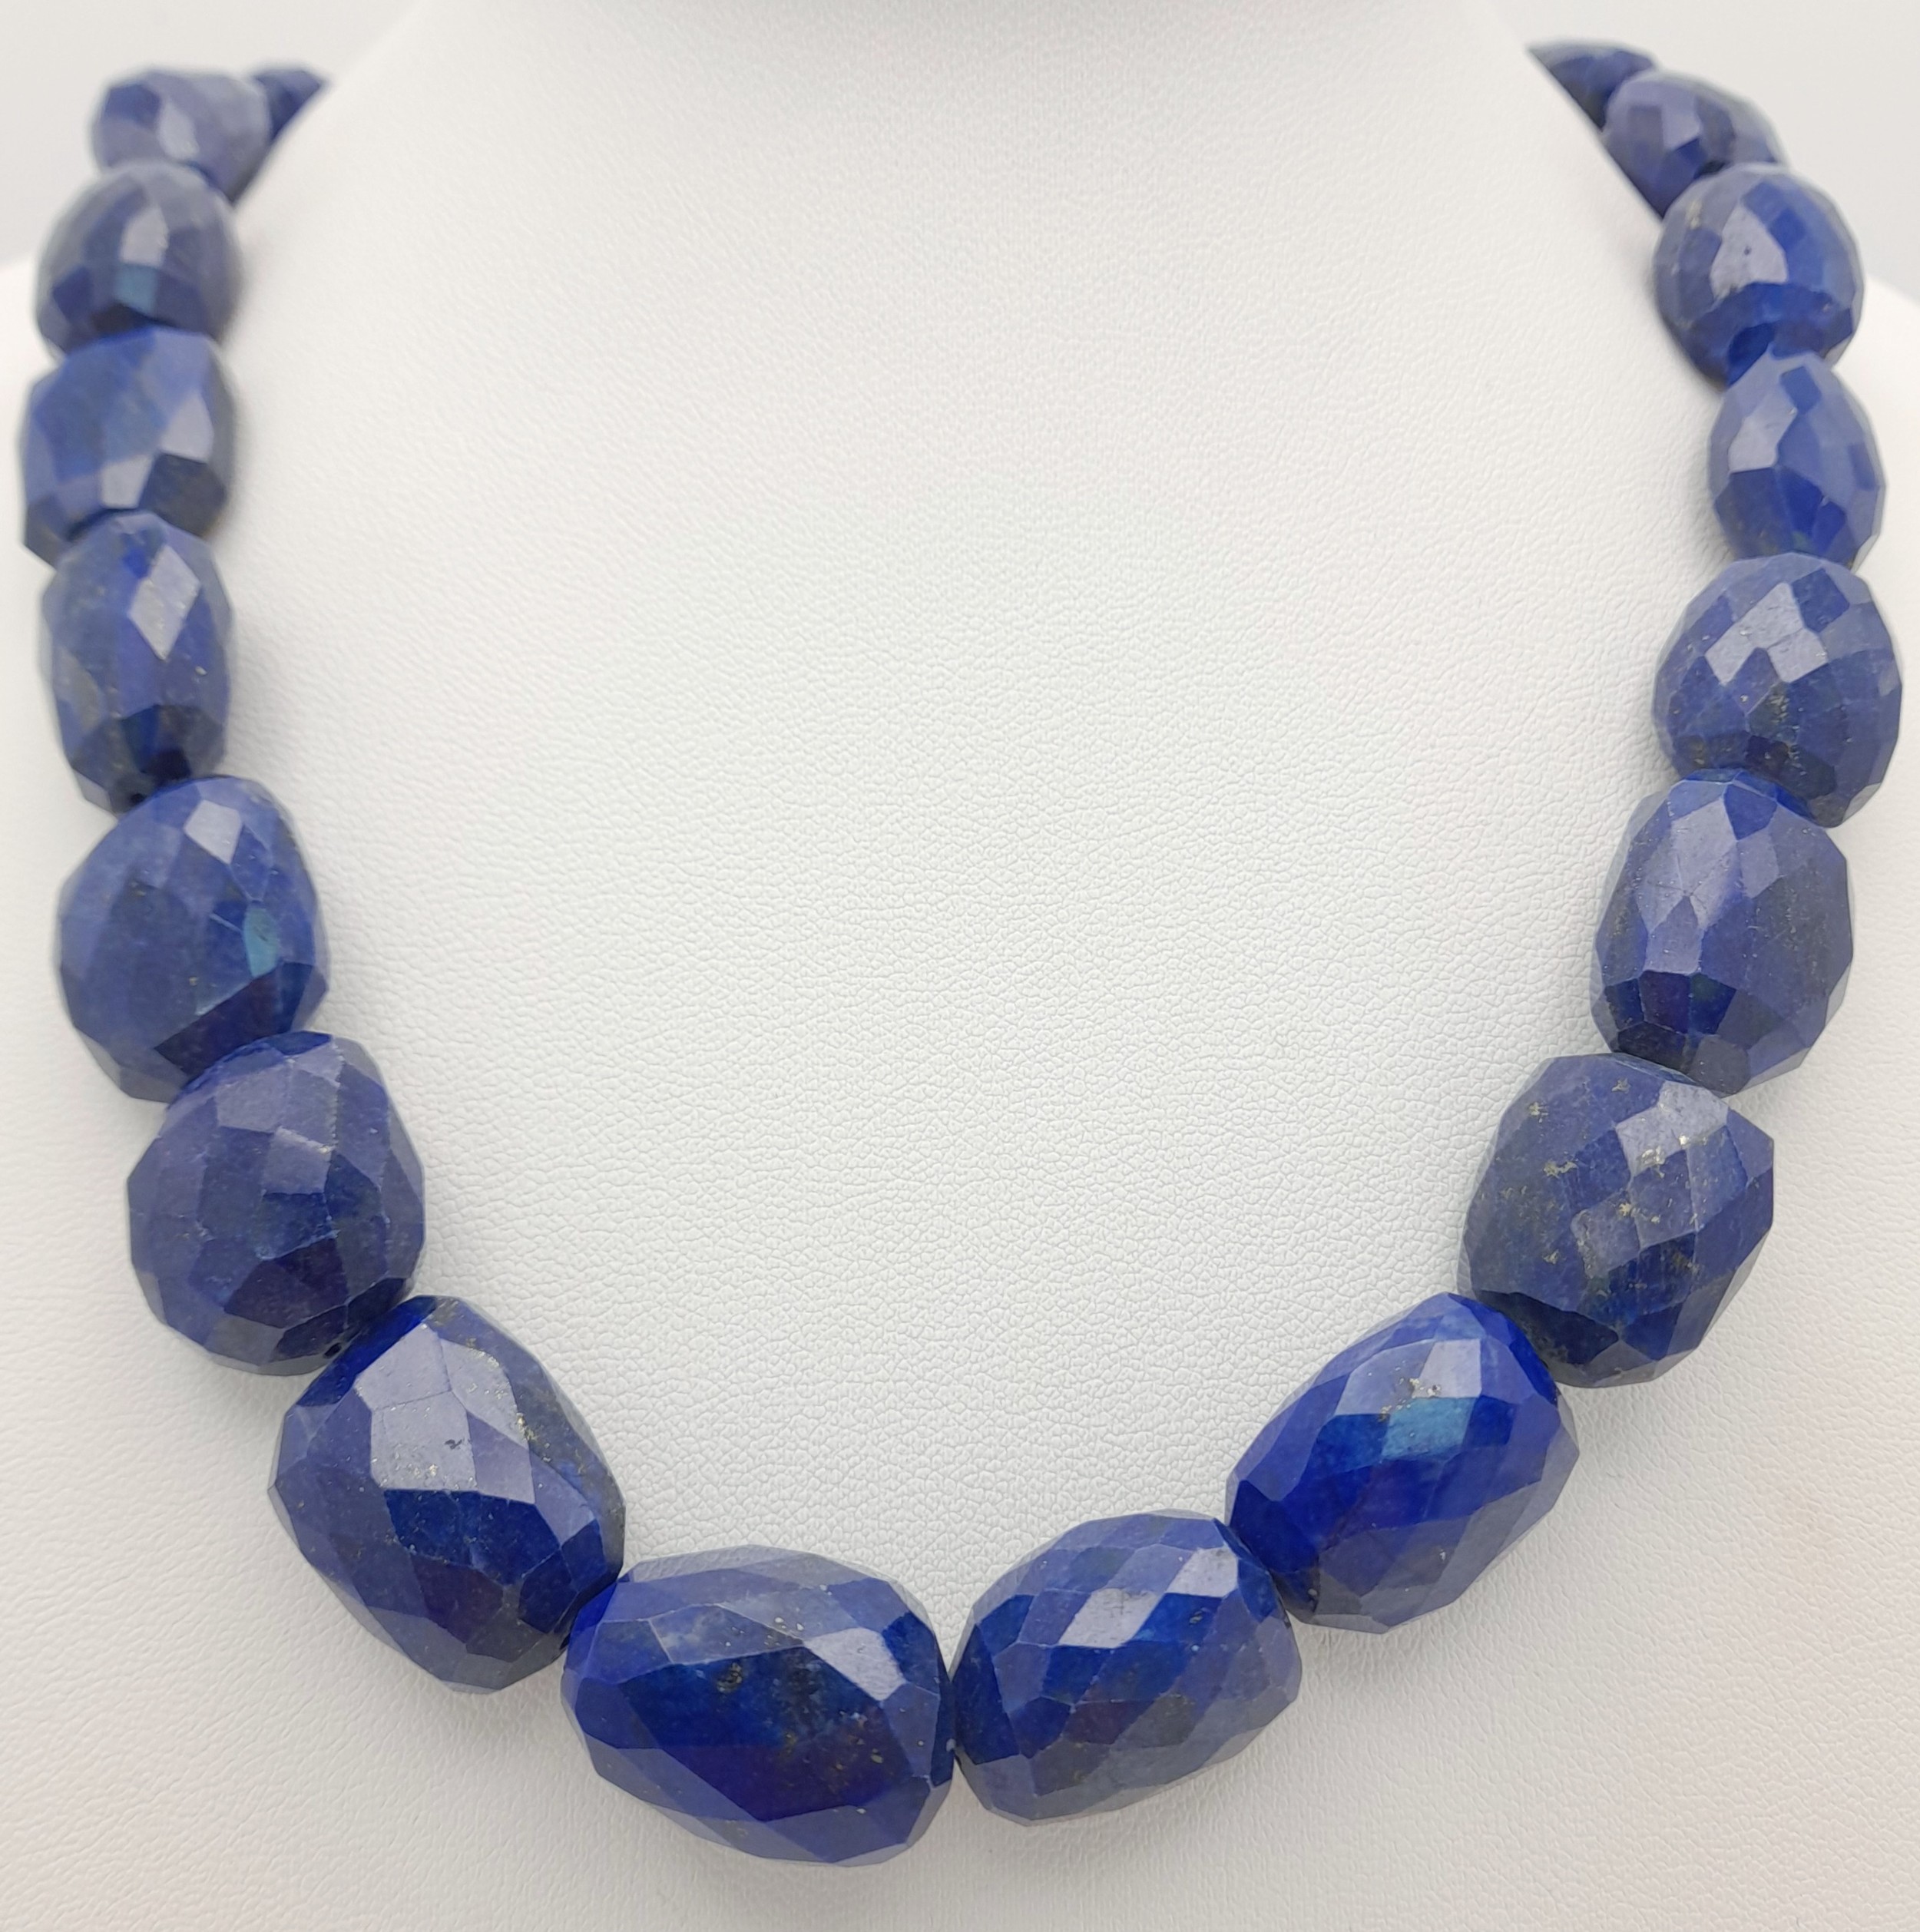 A Lapis Lazuli Jewellery Suite. Includes: necklace, earrings, bracelet and ring - size S. - Image 5 of 6